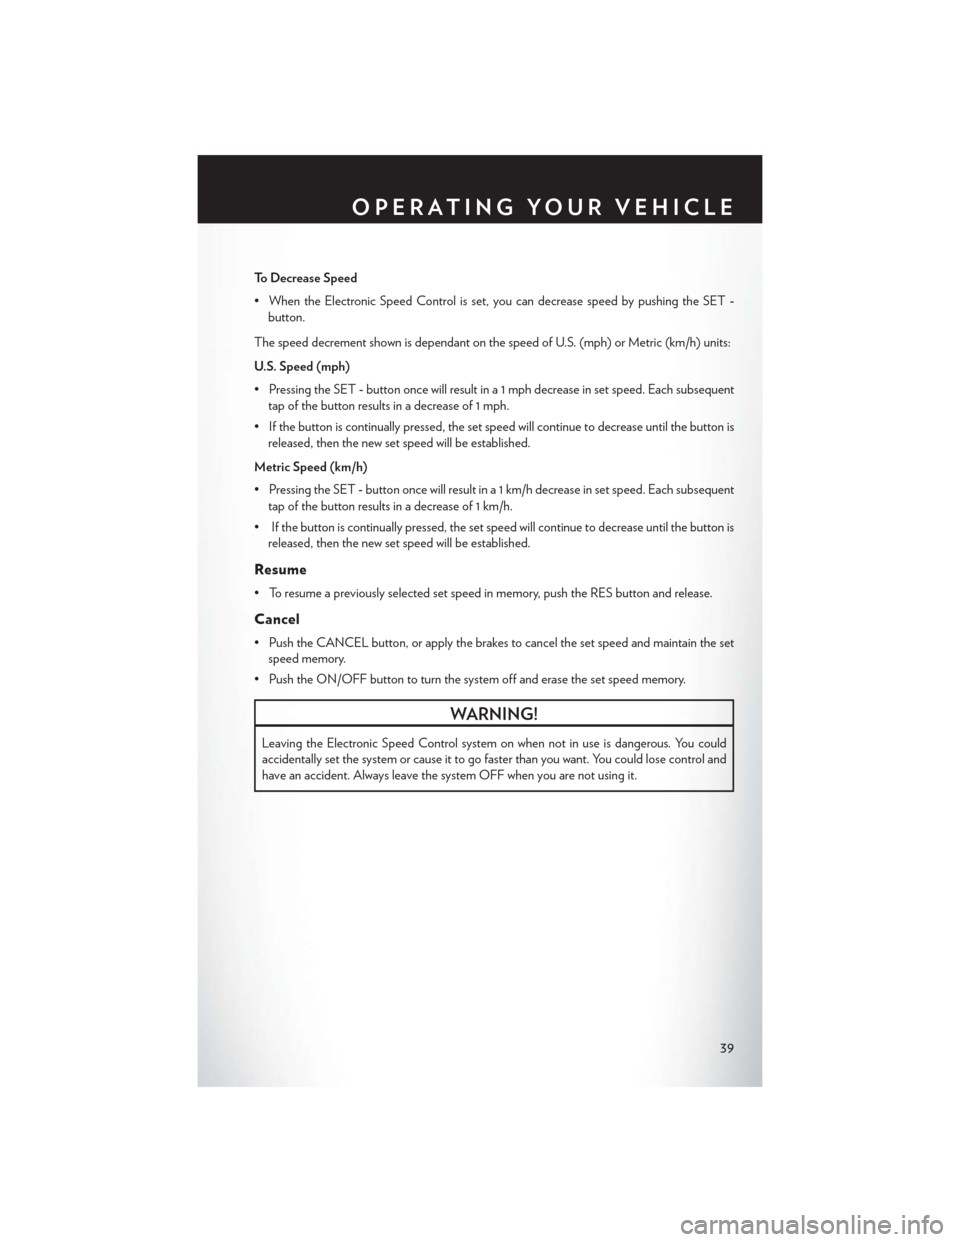 CHRYSLER 200 2015 2.G User Guide To Decrease Speed
• When the Electronic Speed Control is set, you can decrease speed by pushing the SET-
button.
The speed decrement shown is dependant on the speed of U.S. (mph) or Metric (km/h) un